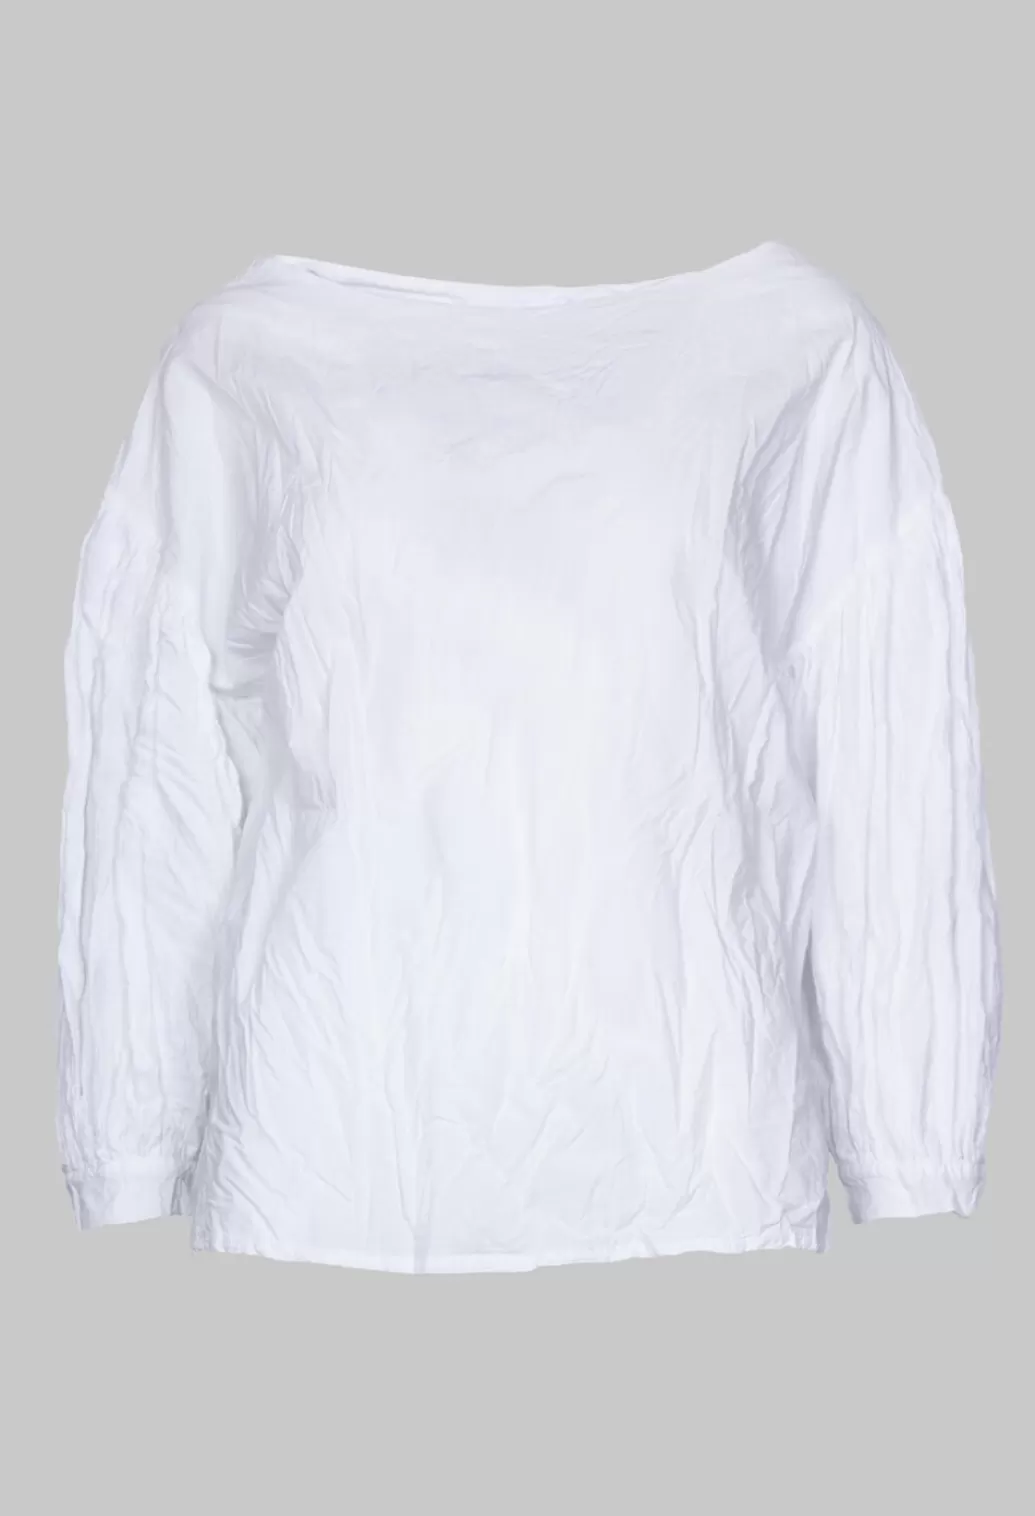 Jumpers^Baci Crinkle Top With Contrasting Sleeves In White